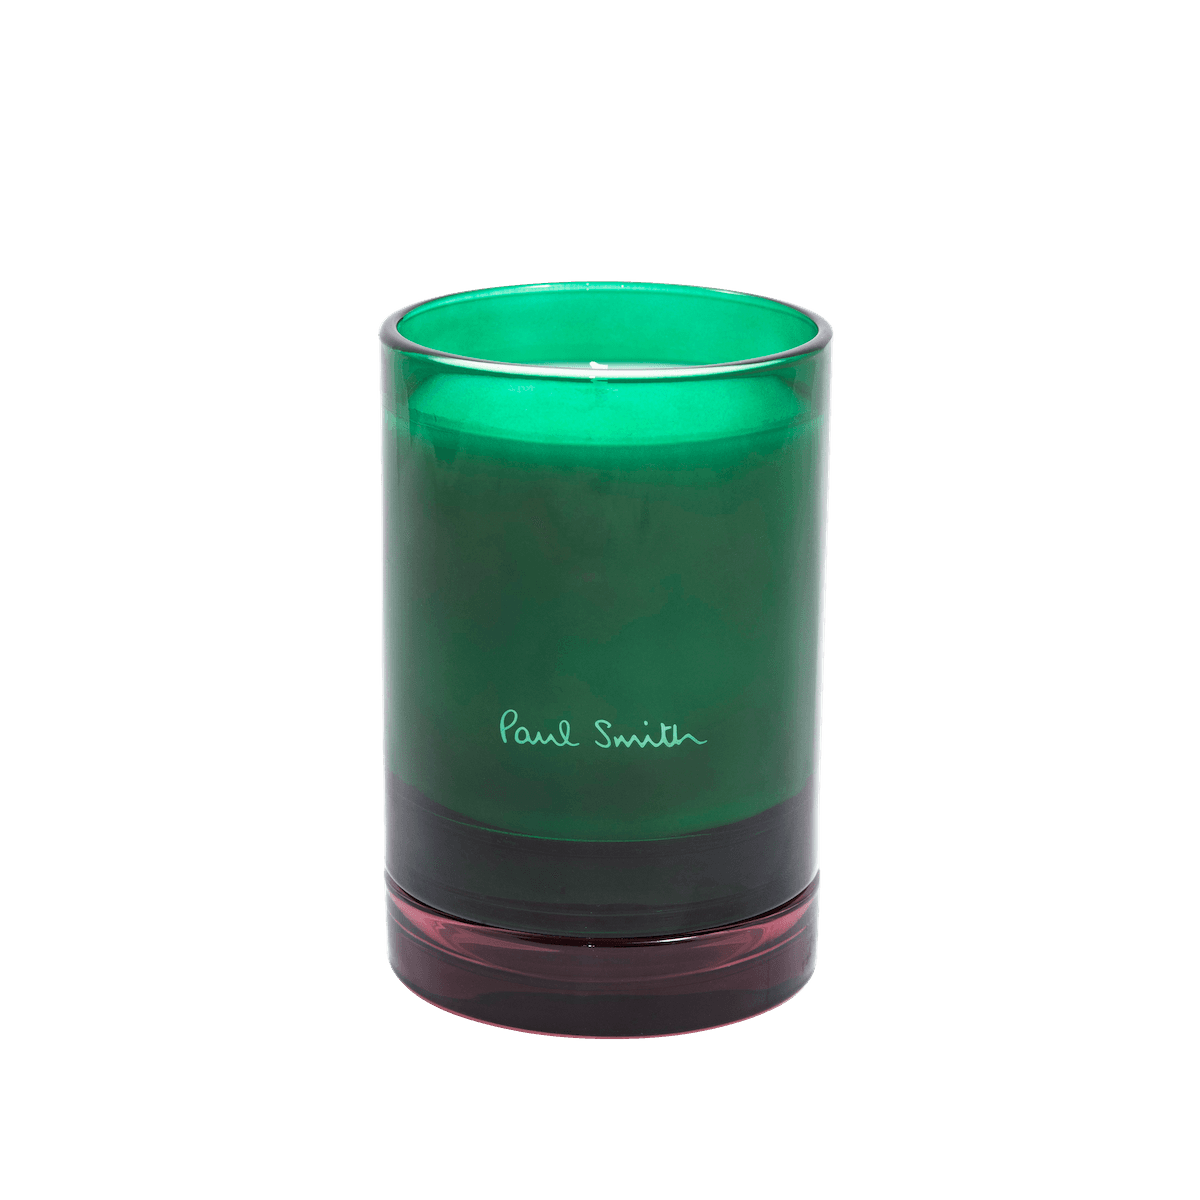 PS Botanist Candle